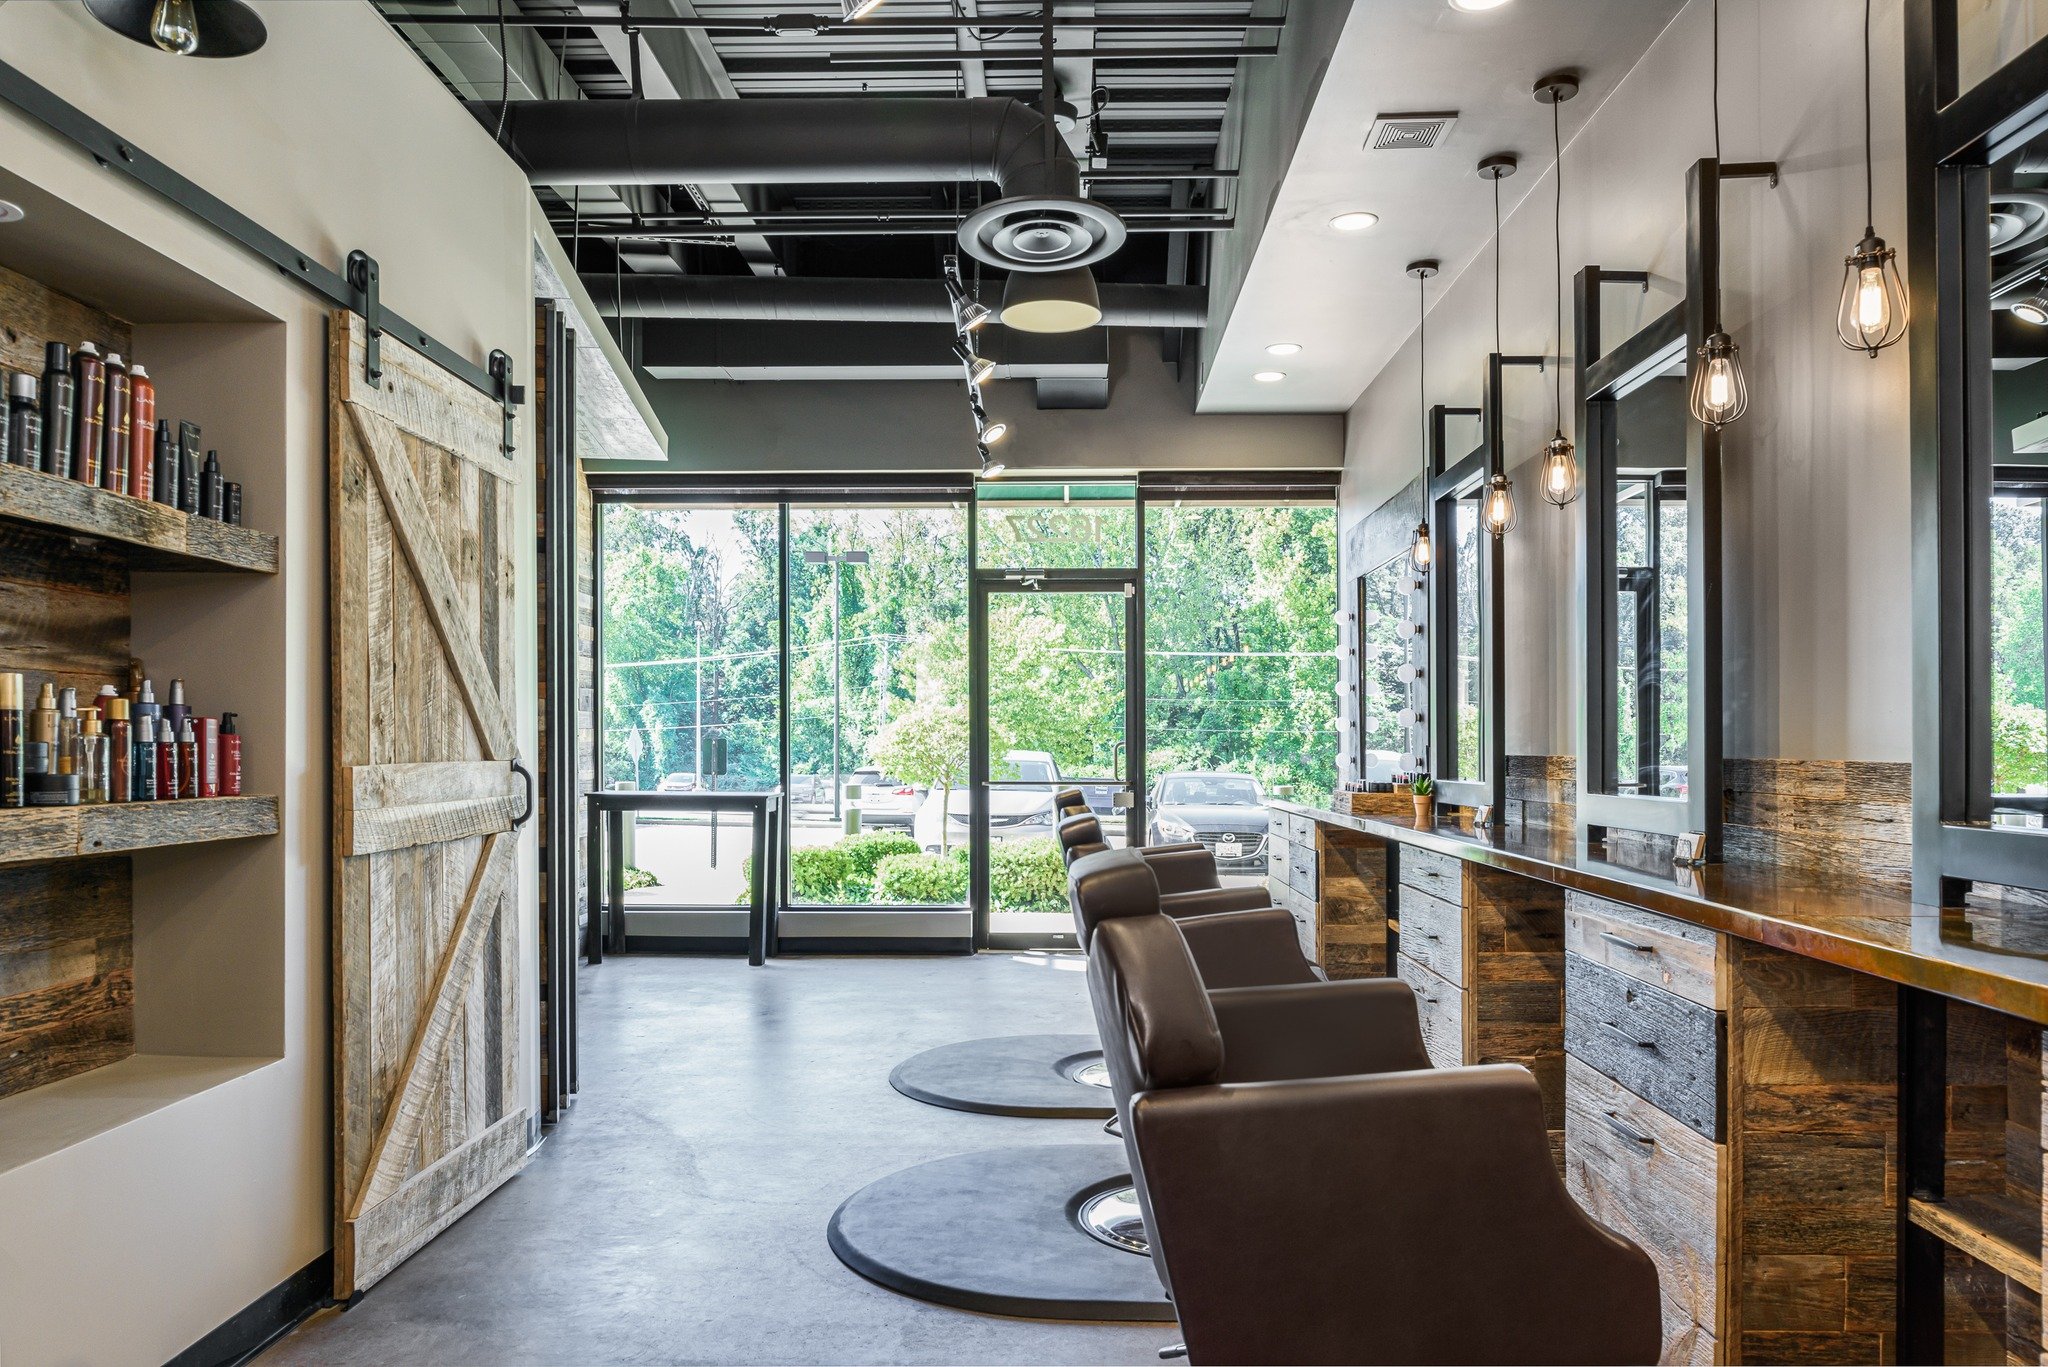 See how LU Design Build transformed this salon into a haven of modern elegance and functionality. From sleek styling stations to chic decor, every detail is crafted to inspire beauty. #SalonUpgrade #ludesignbuild #interiordesign 
Designer: @jennifer_